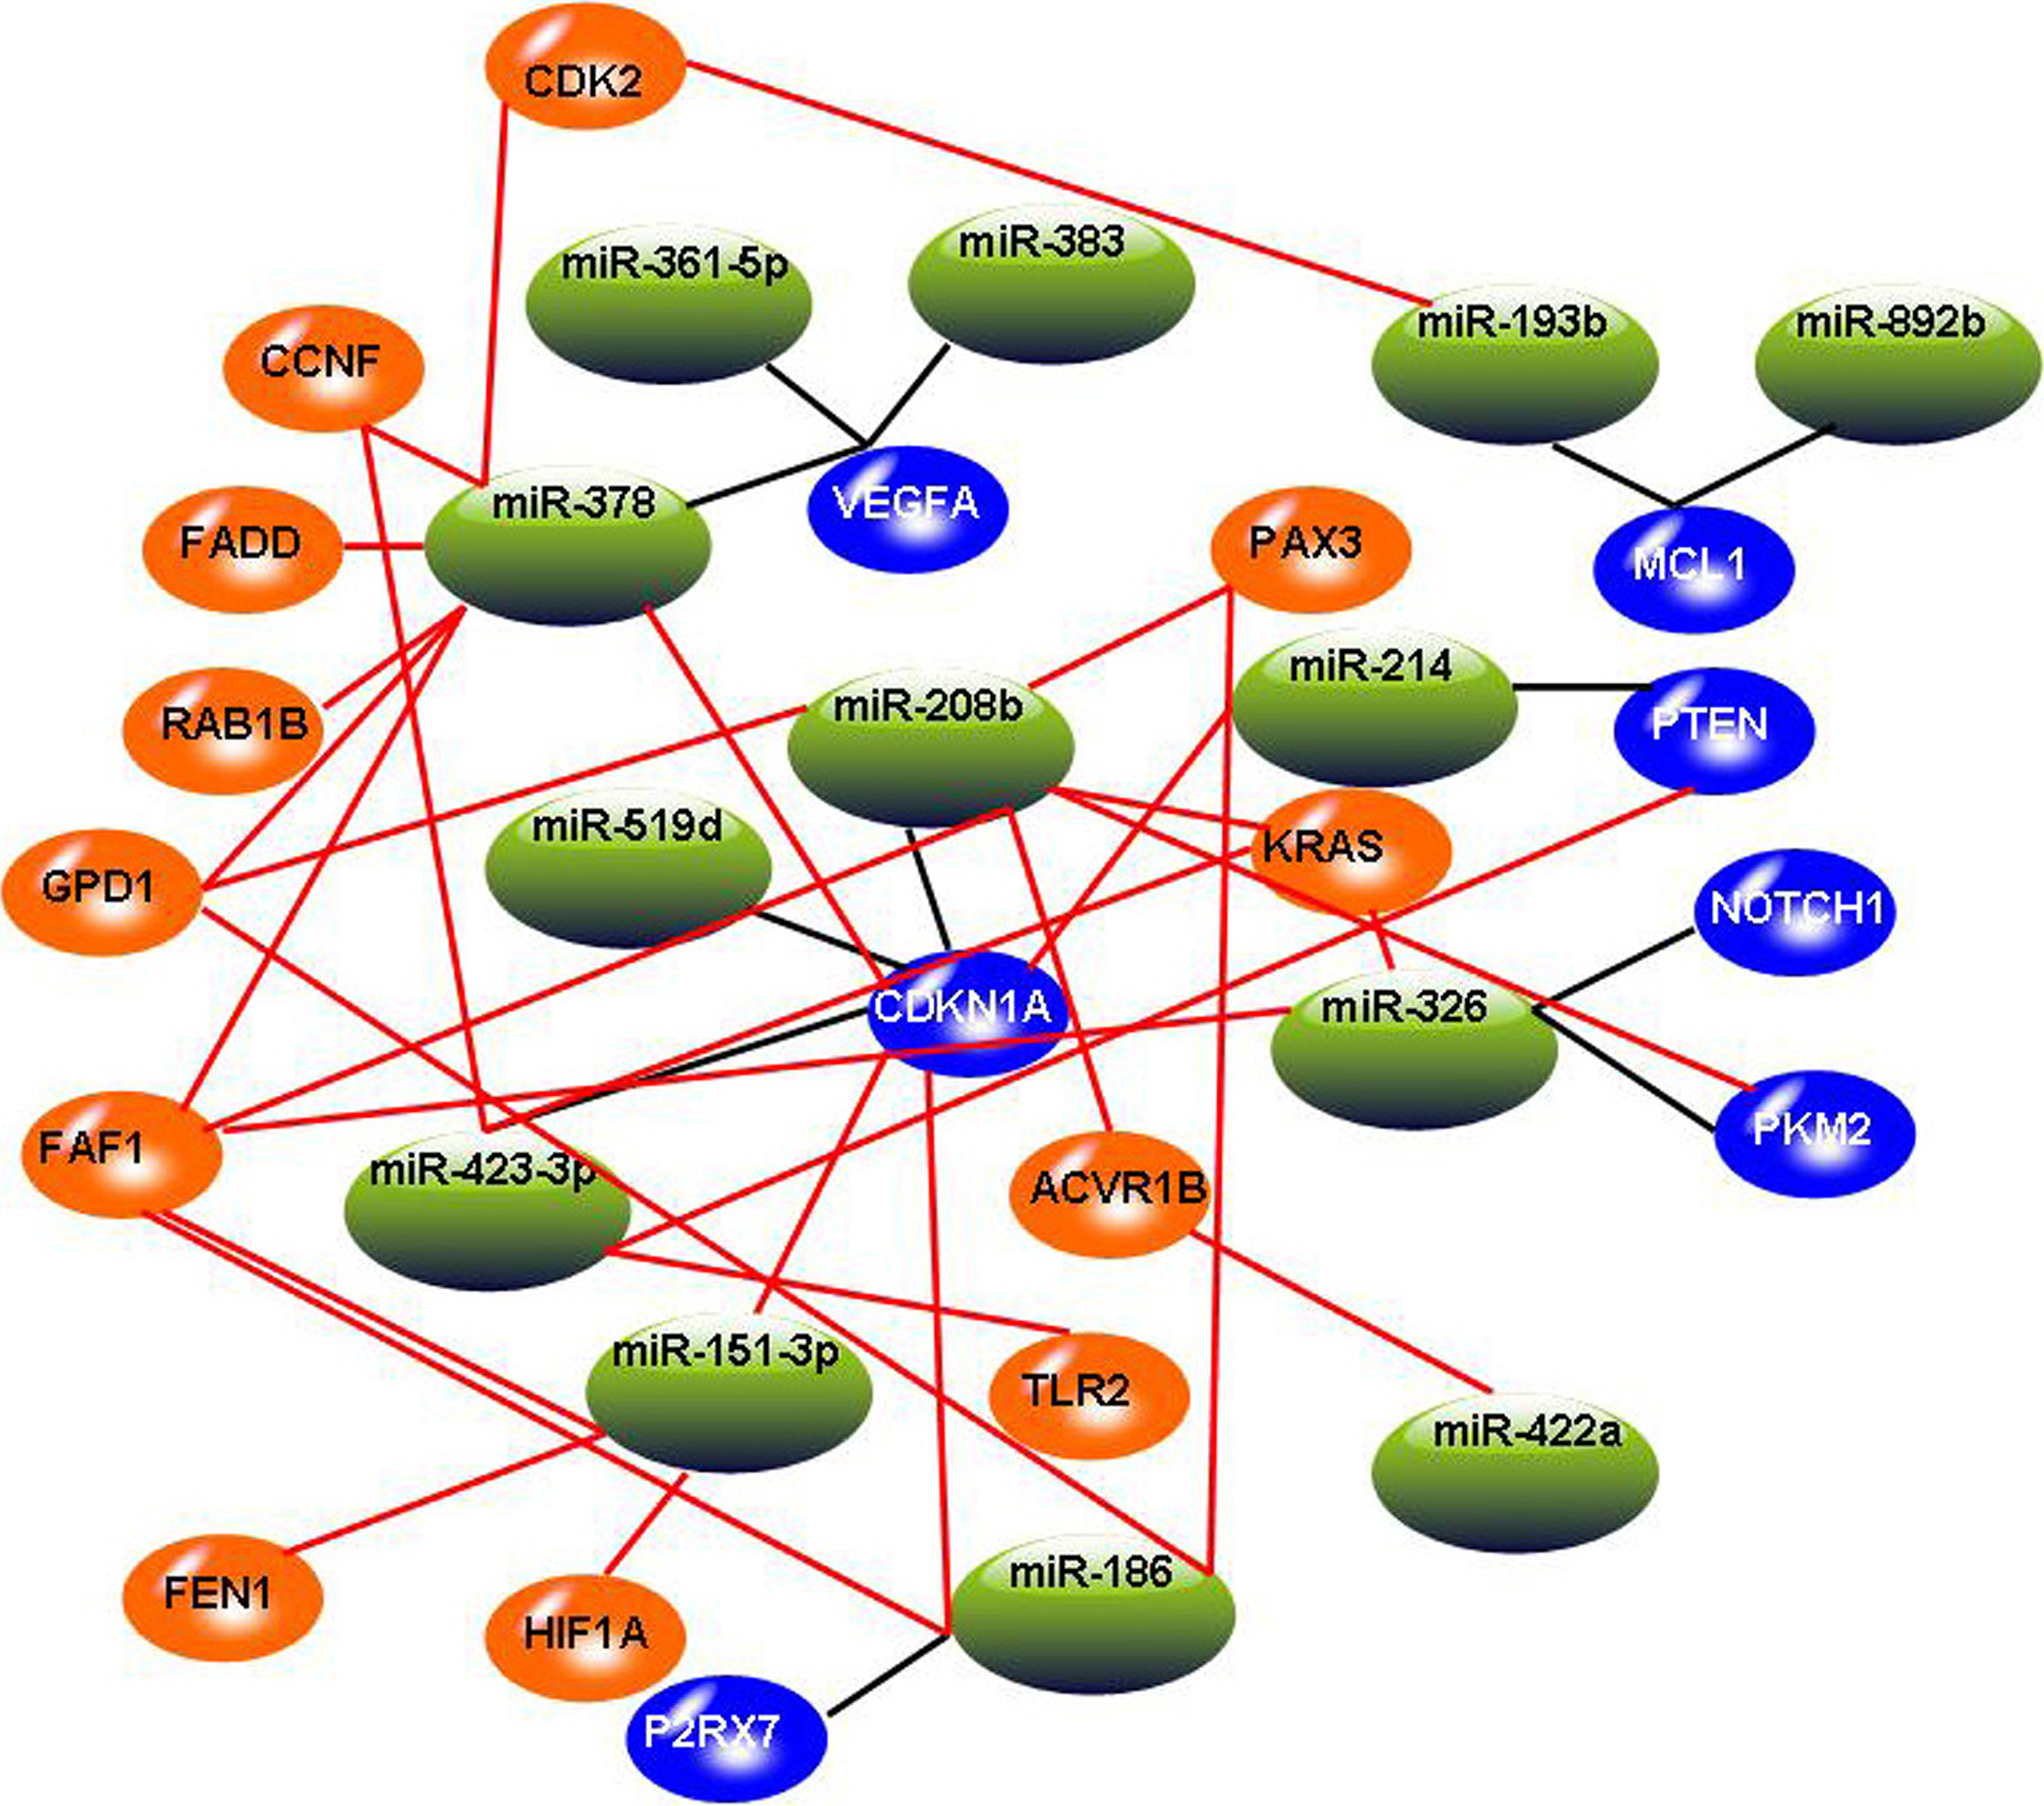 The constructed miRNA-mRNA regulation network. In this graph, blue circles indicate target genes involved in three miRNA-target databases, and the orange circles indicate added target genes involved in significant miRNA-mRNA pairs. Black lines indicate miRNA-mRNA relationships involved in three miRNA-target databases, and red lines indicate added miRNA-mRNA relationships involved in significant miRNA-mRNA pairs. 